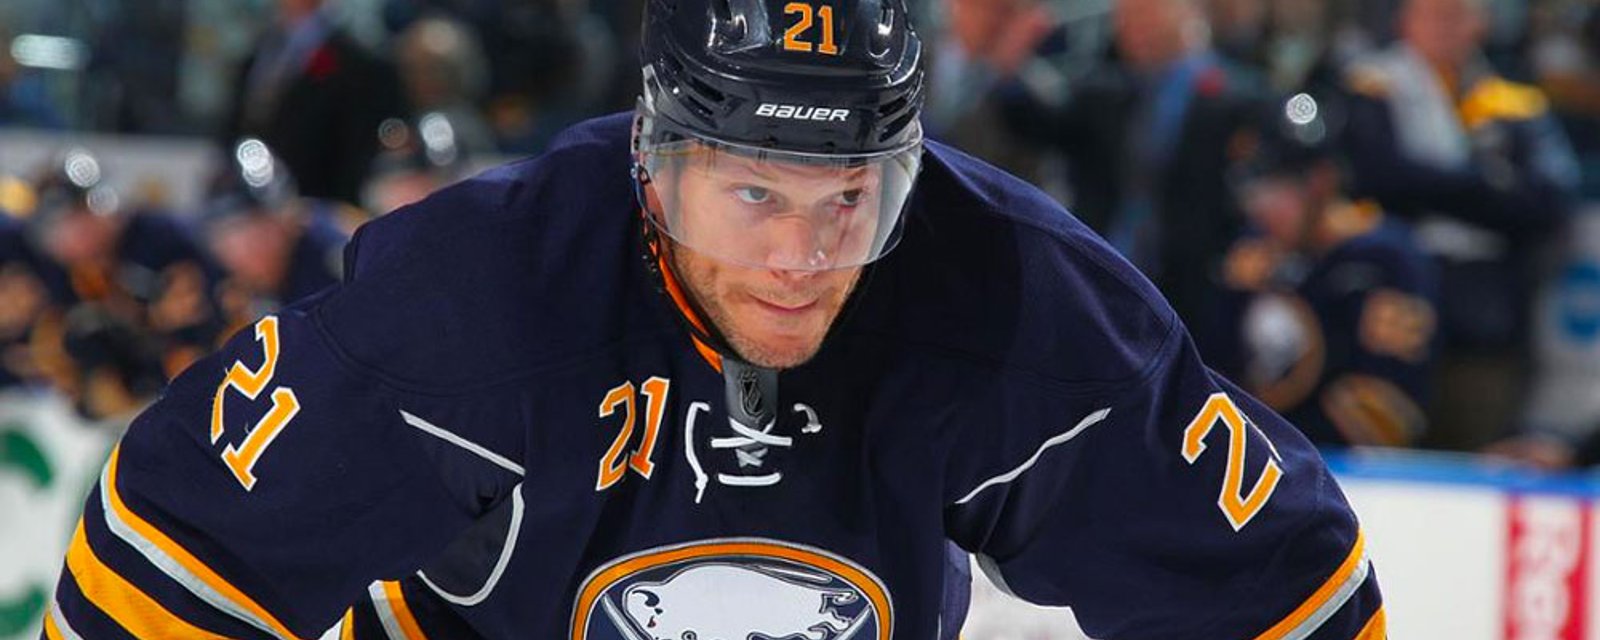 Okposo’s career in doubt after suffering yet another brutal head injury